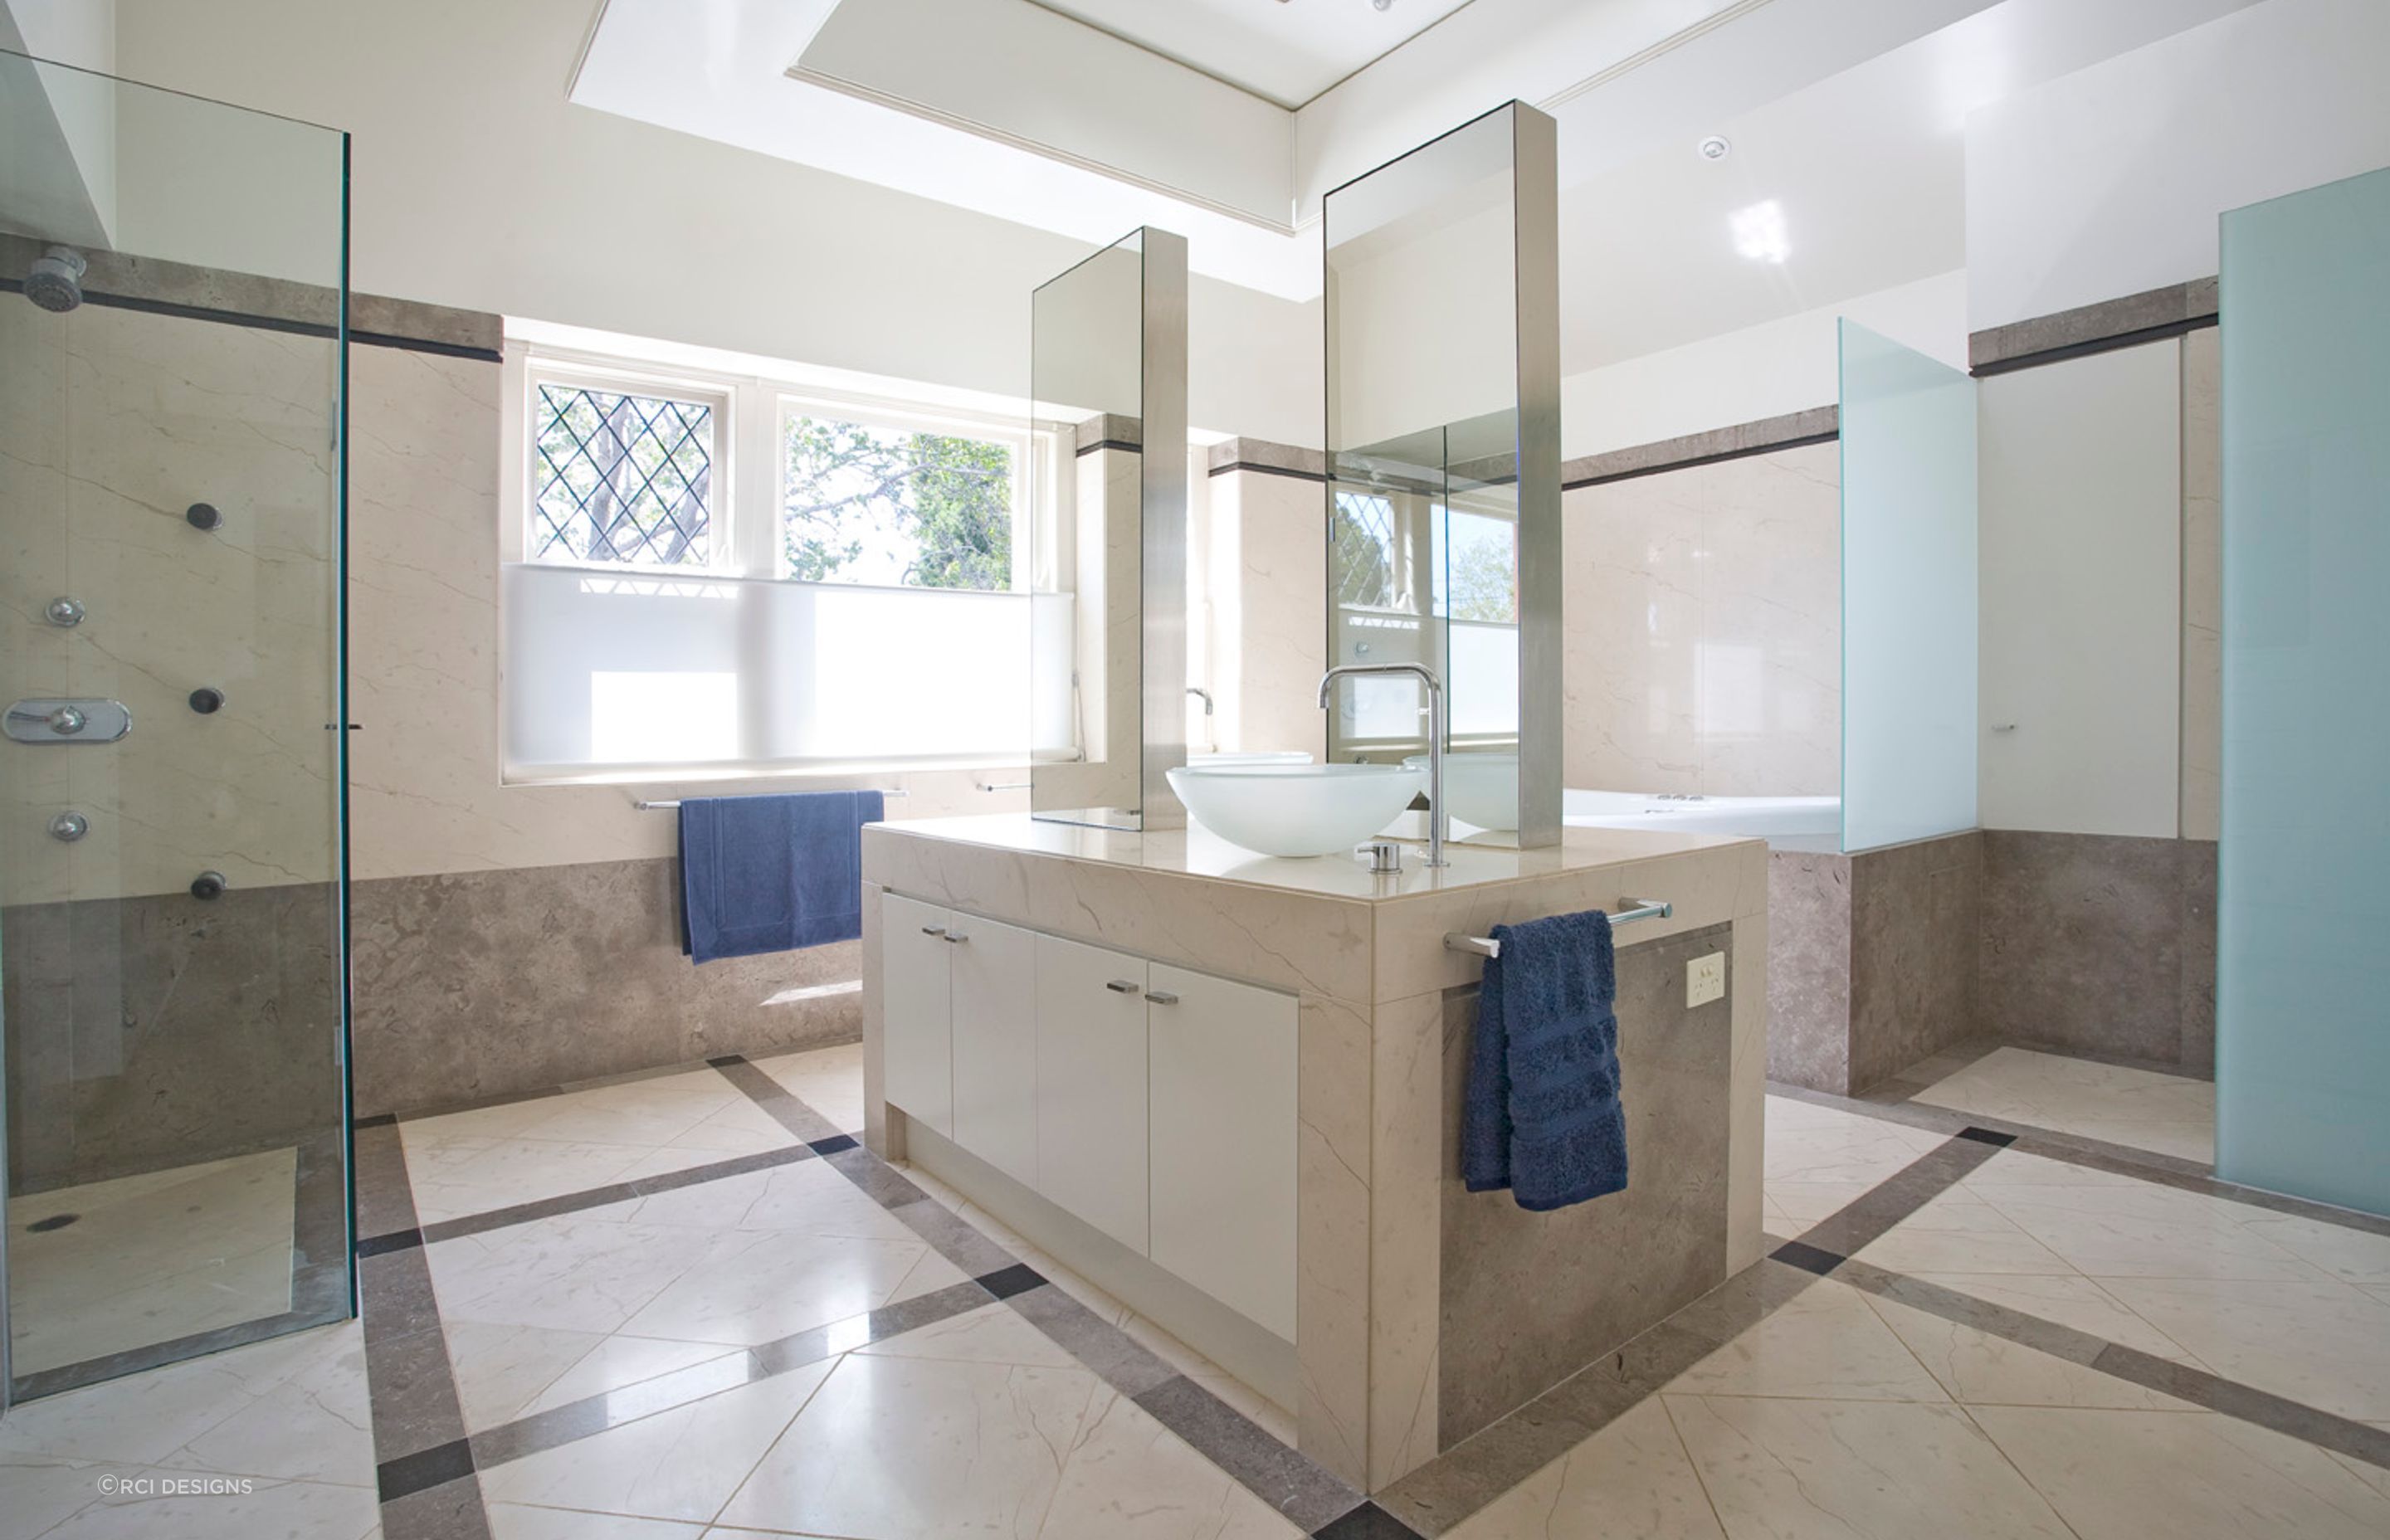 Stylish floor and wall tiles have been used to perfection in this bathroom space. Featured Project: Studley Park Bathroom by RCI Designs